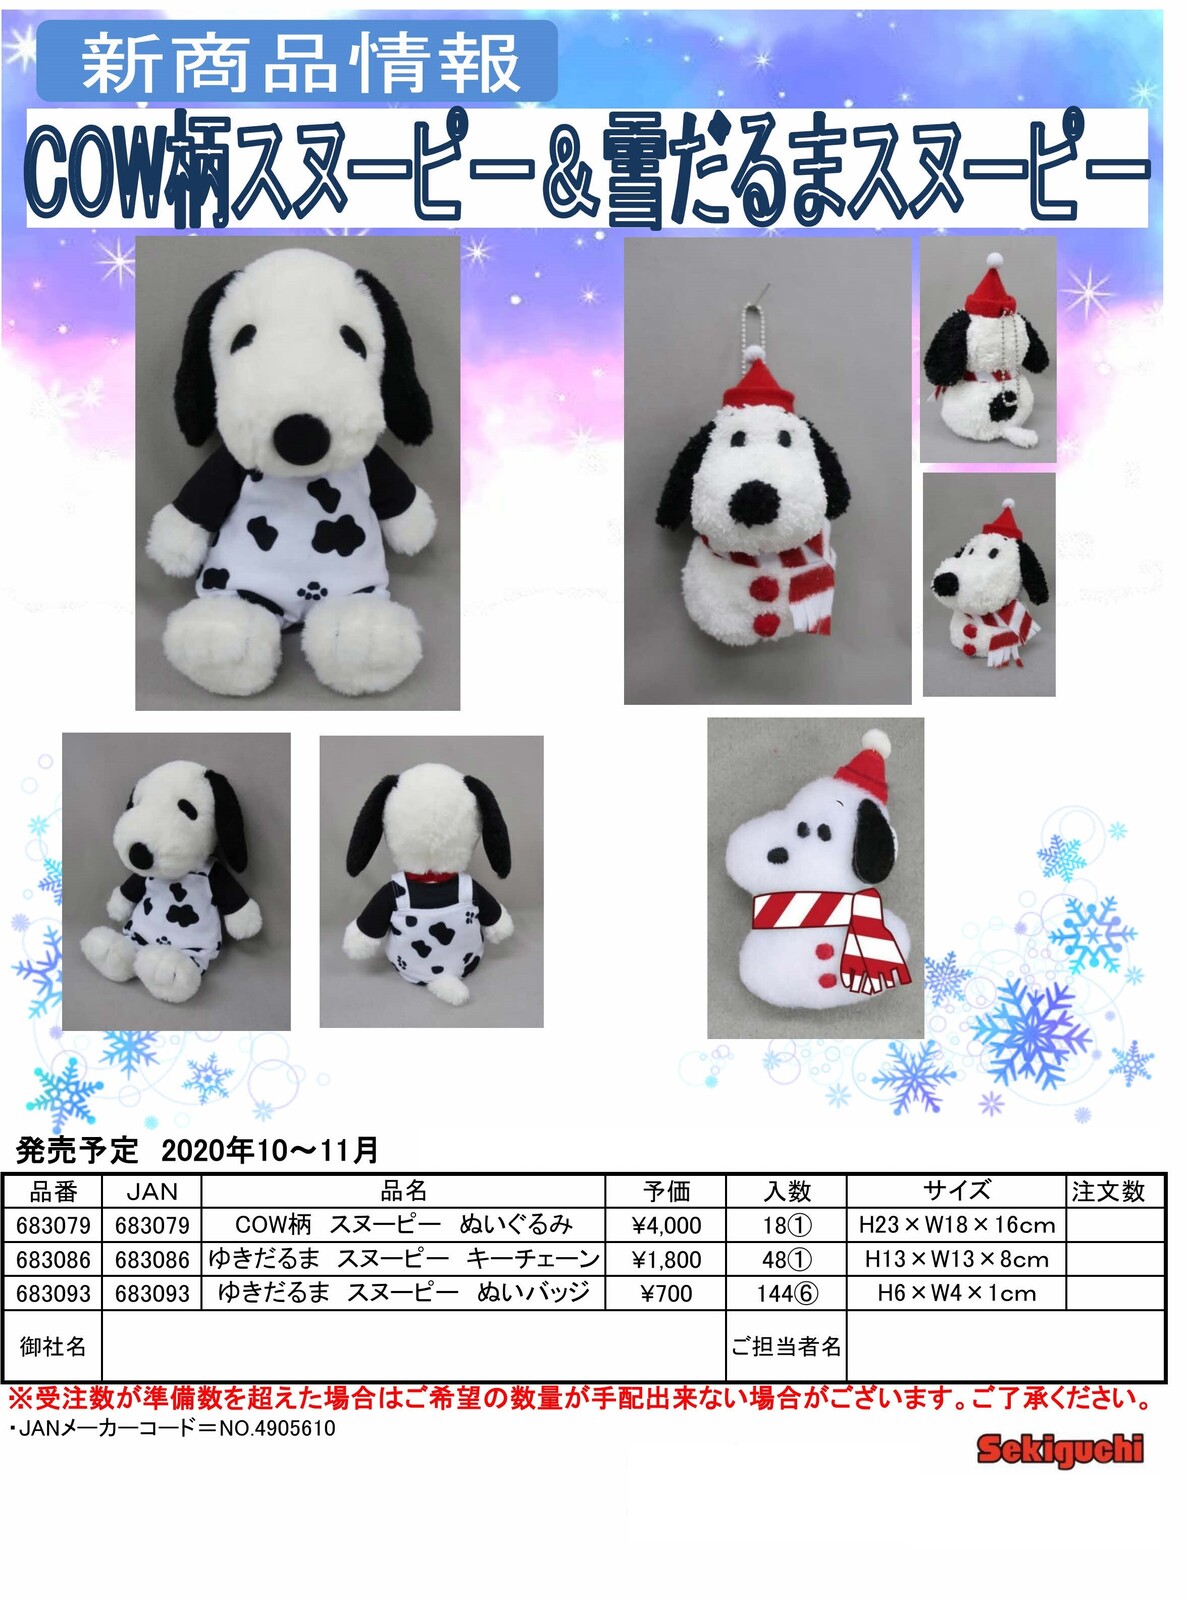 Snoopy Snowman Snoopy Import Japanese Products At Wholesale Prices Super Delivery